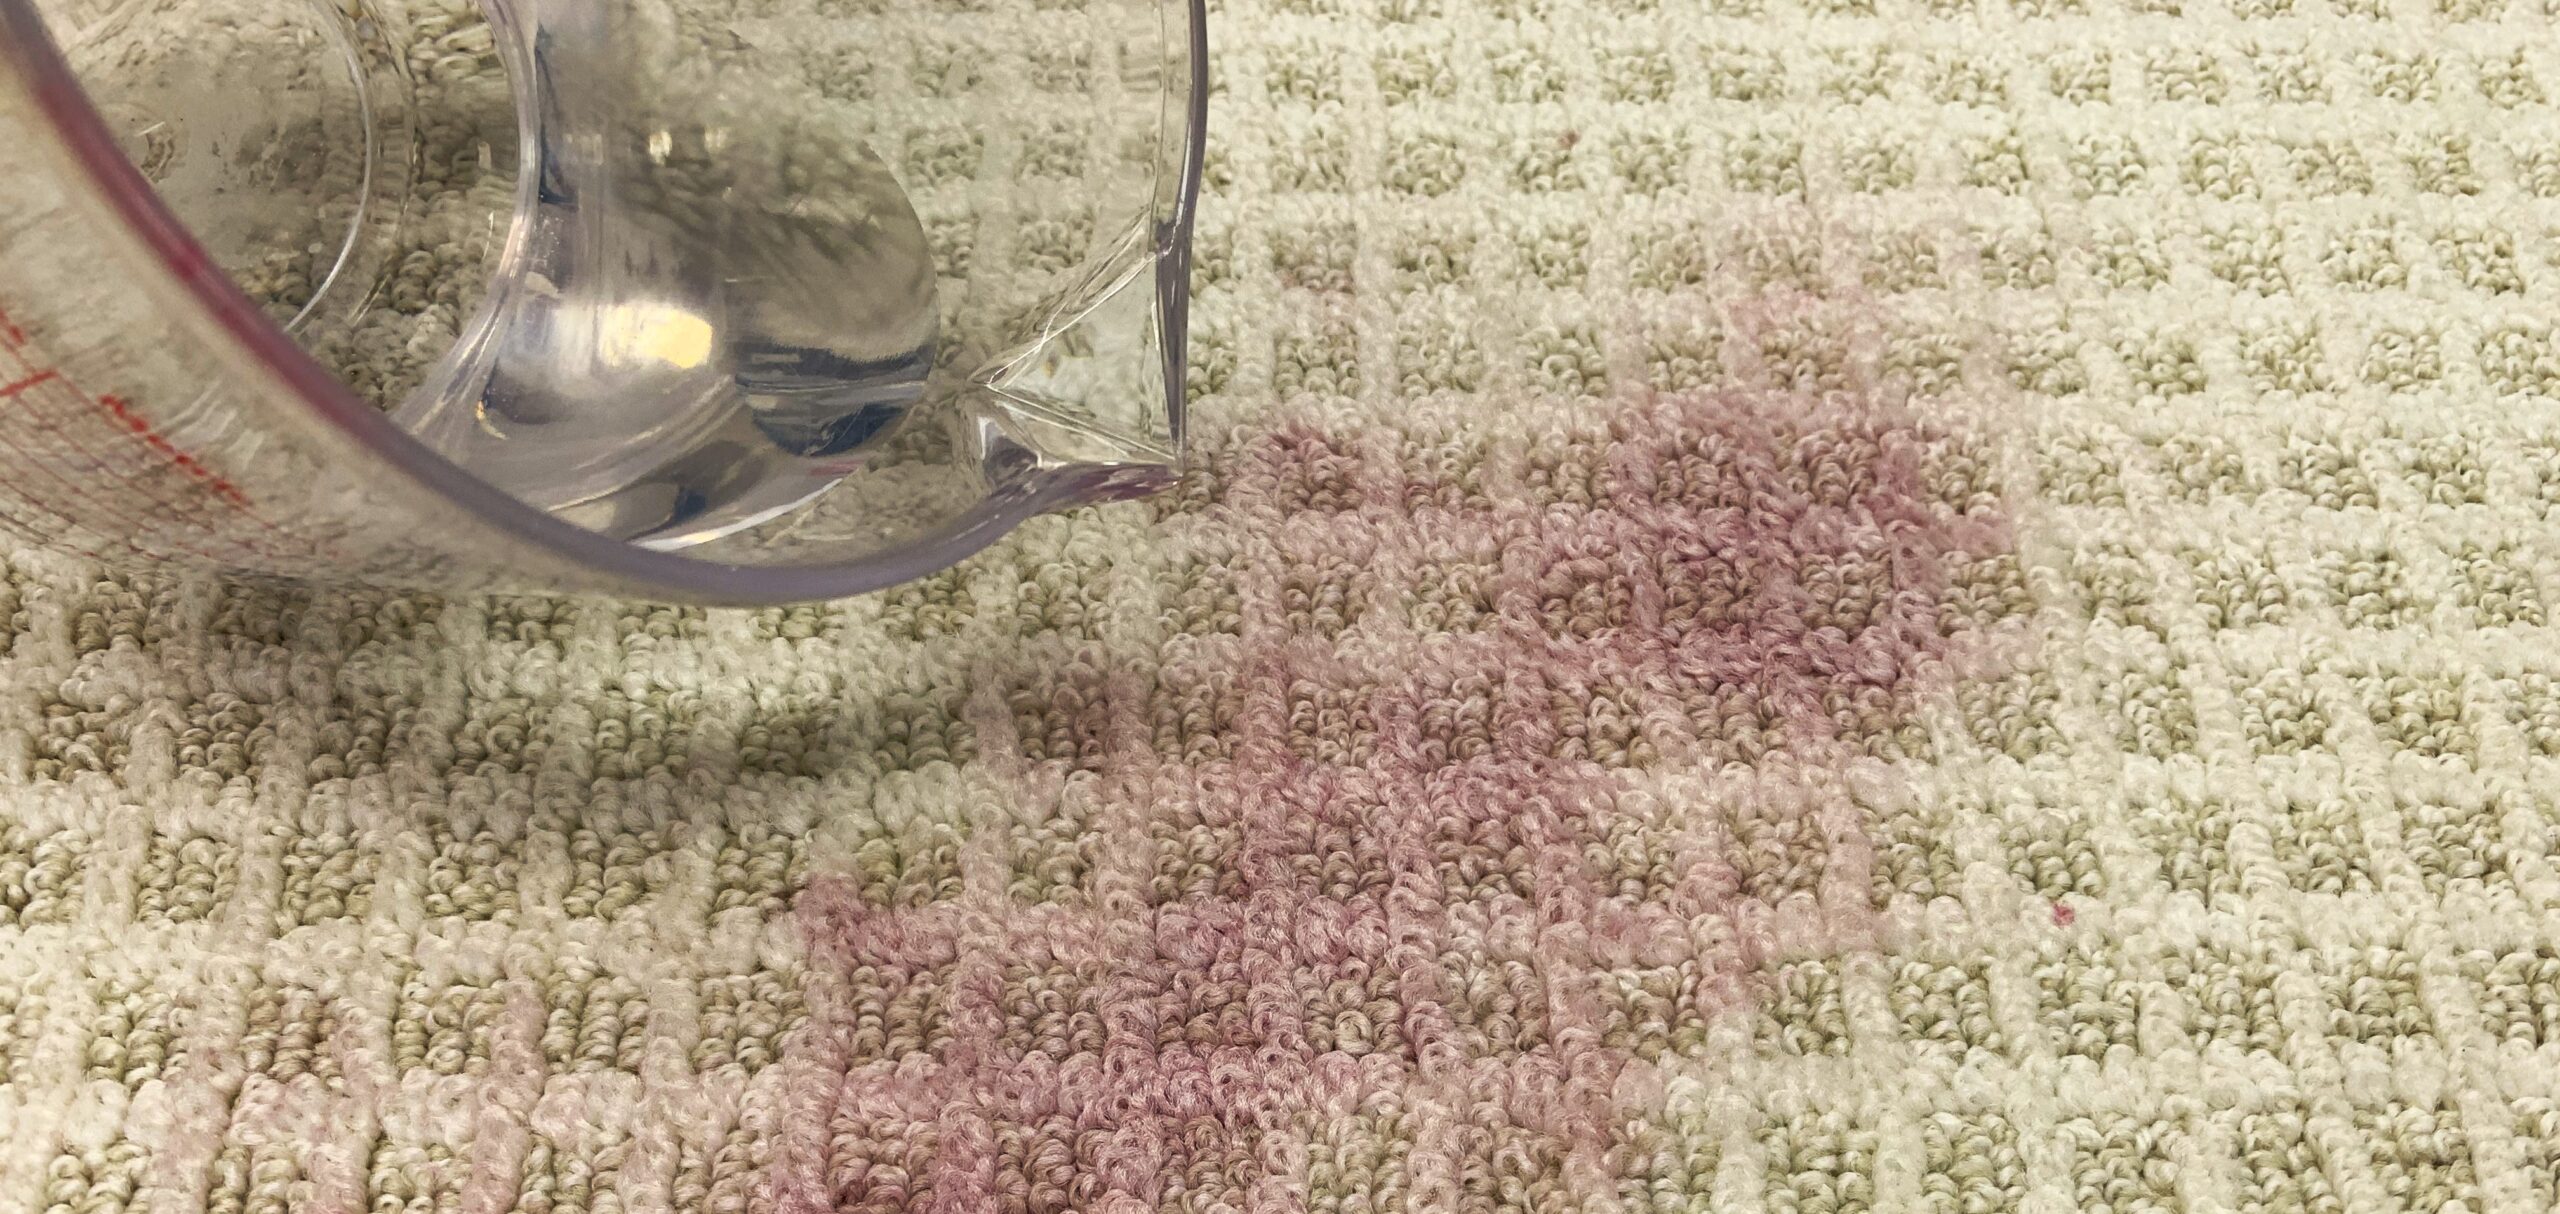 Close-up of water over lingering wine stain.